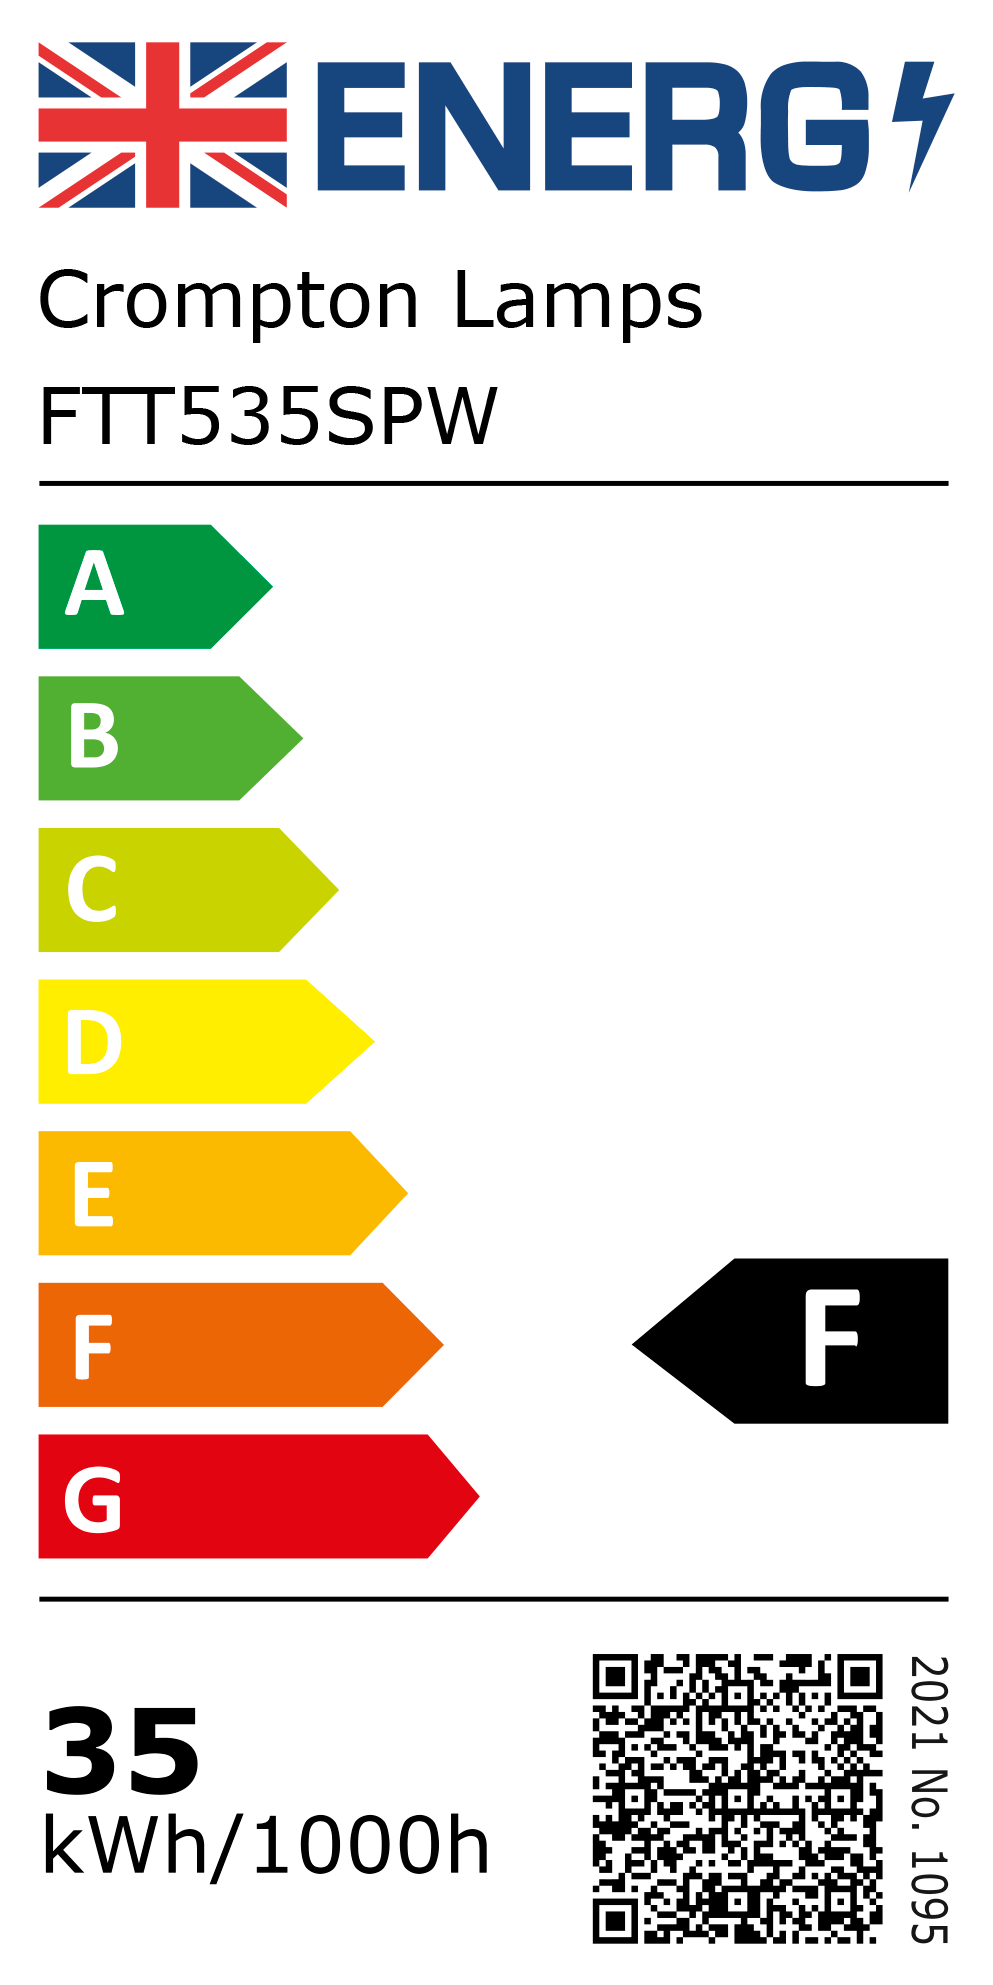 New 2021 Energy Rating Label: Stock Code FTT535SPW